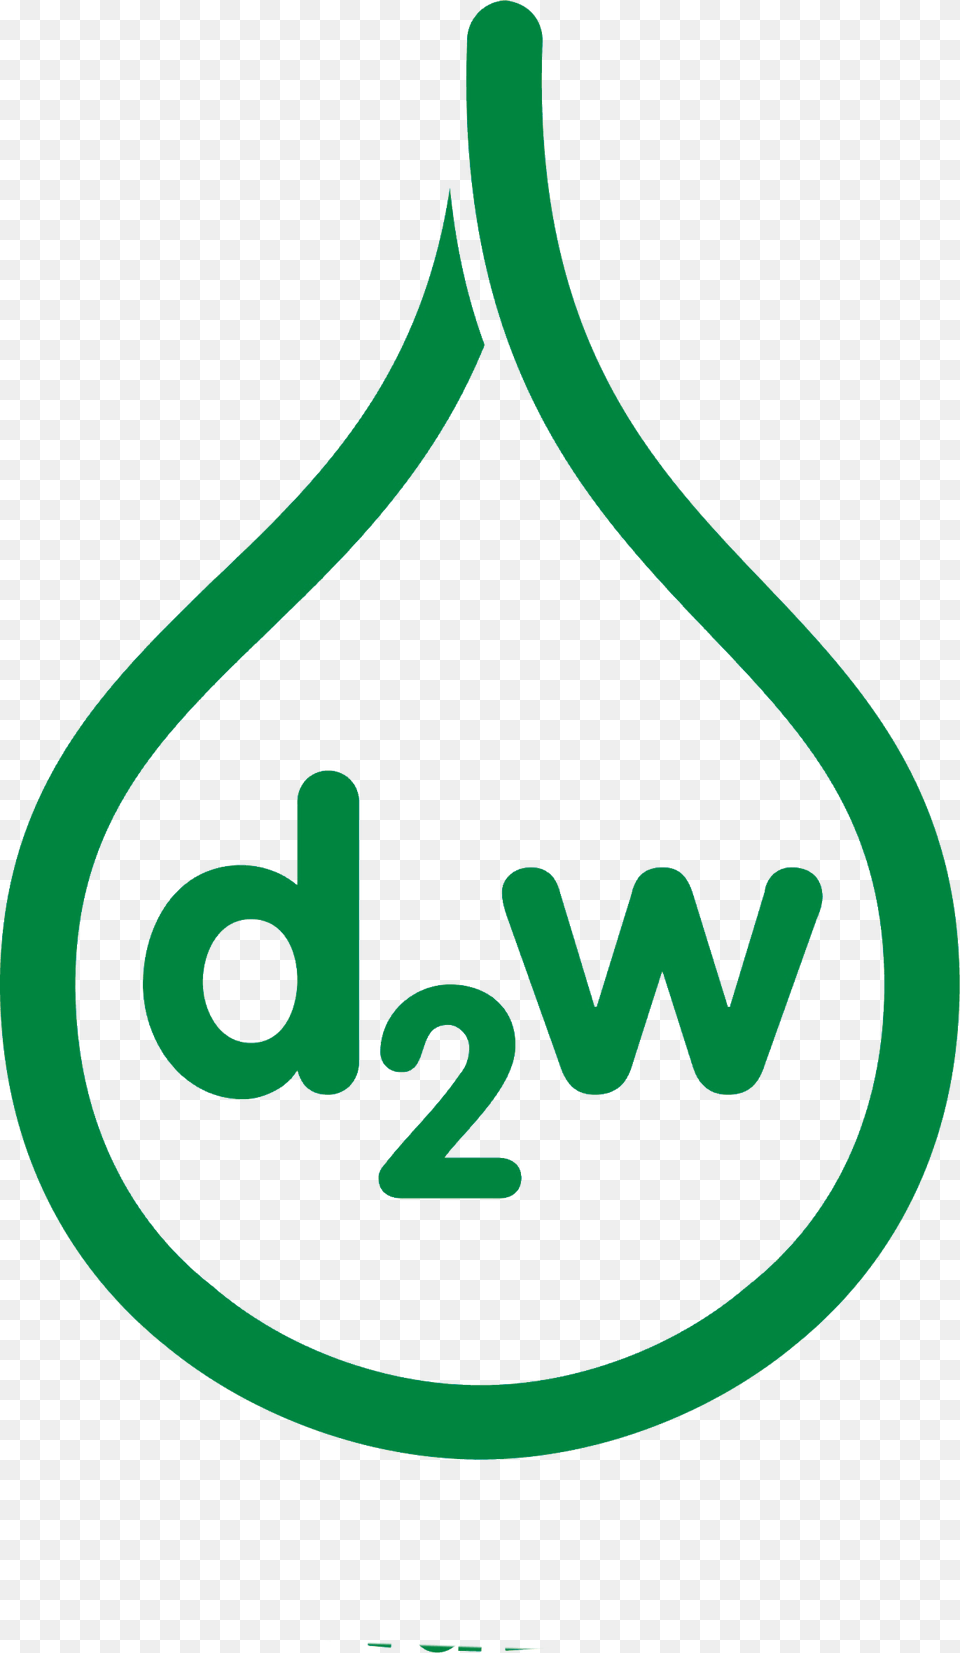 Dark Green New Pantone Cut Out D2w Droplet Oxo Biodegradable Plastic Logo, Smoke Pipe Free Transparent Png